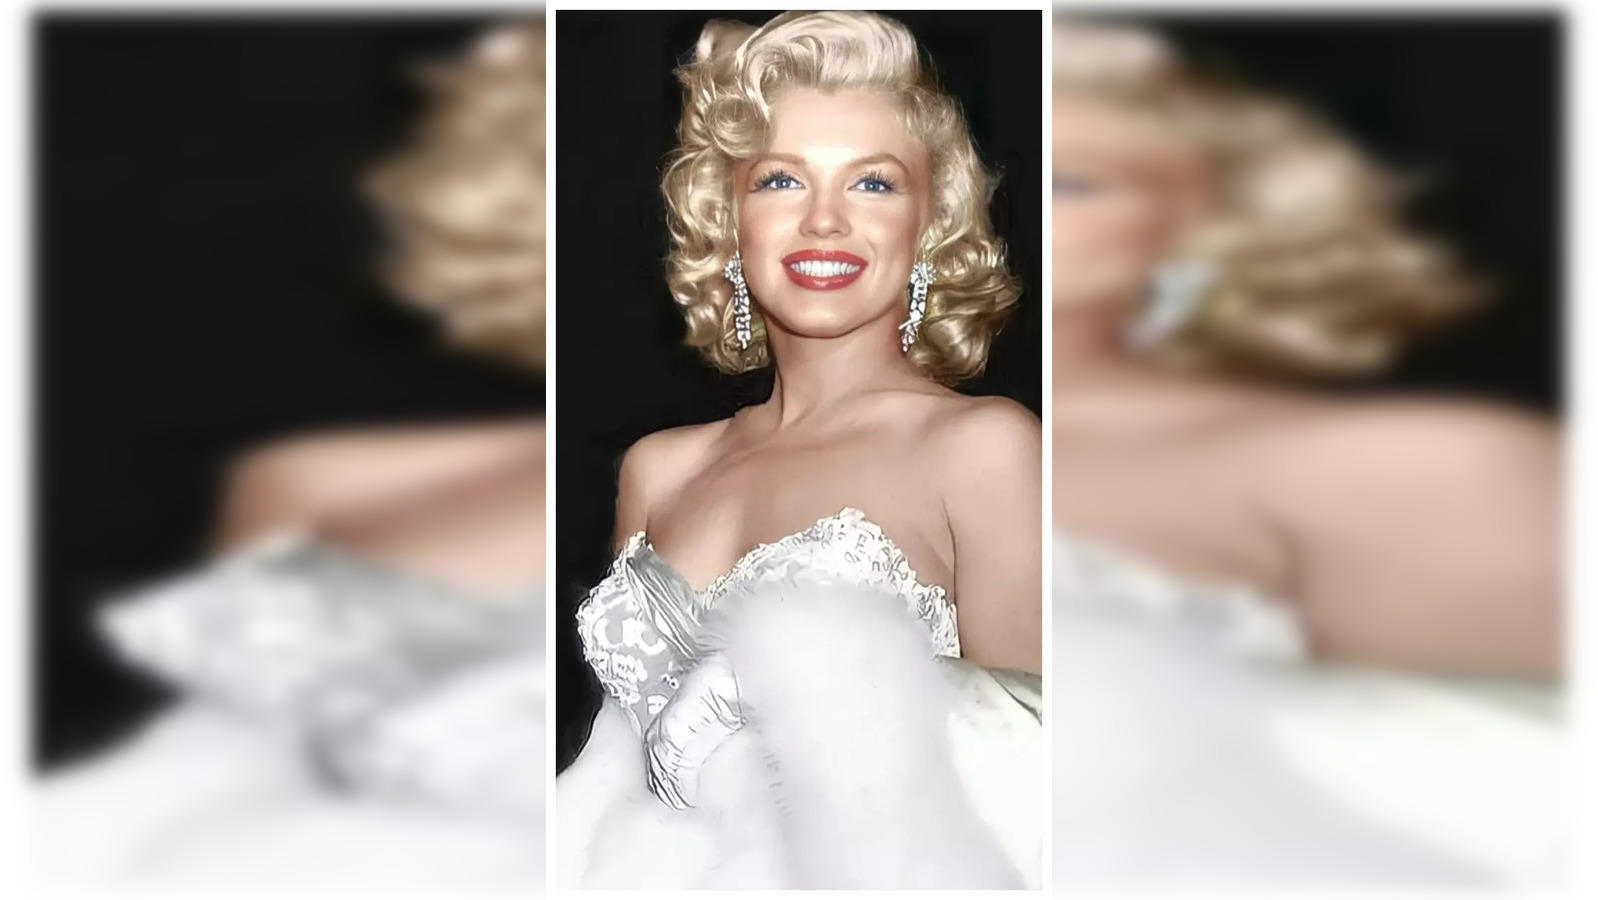 Marilyn Monroe death: What happened to Marilyn Monroe's body post her  death? Read here - The Economic Times